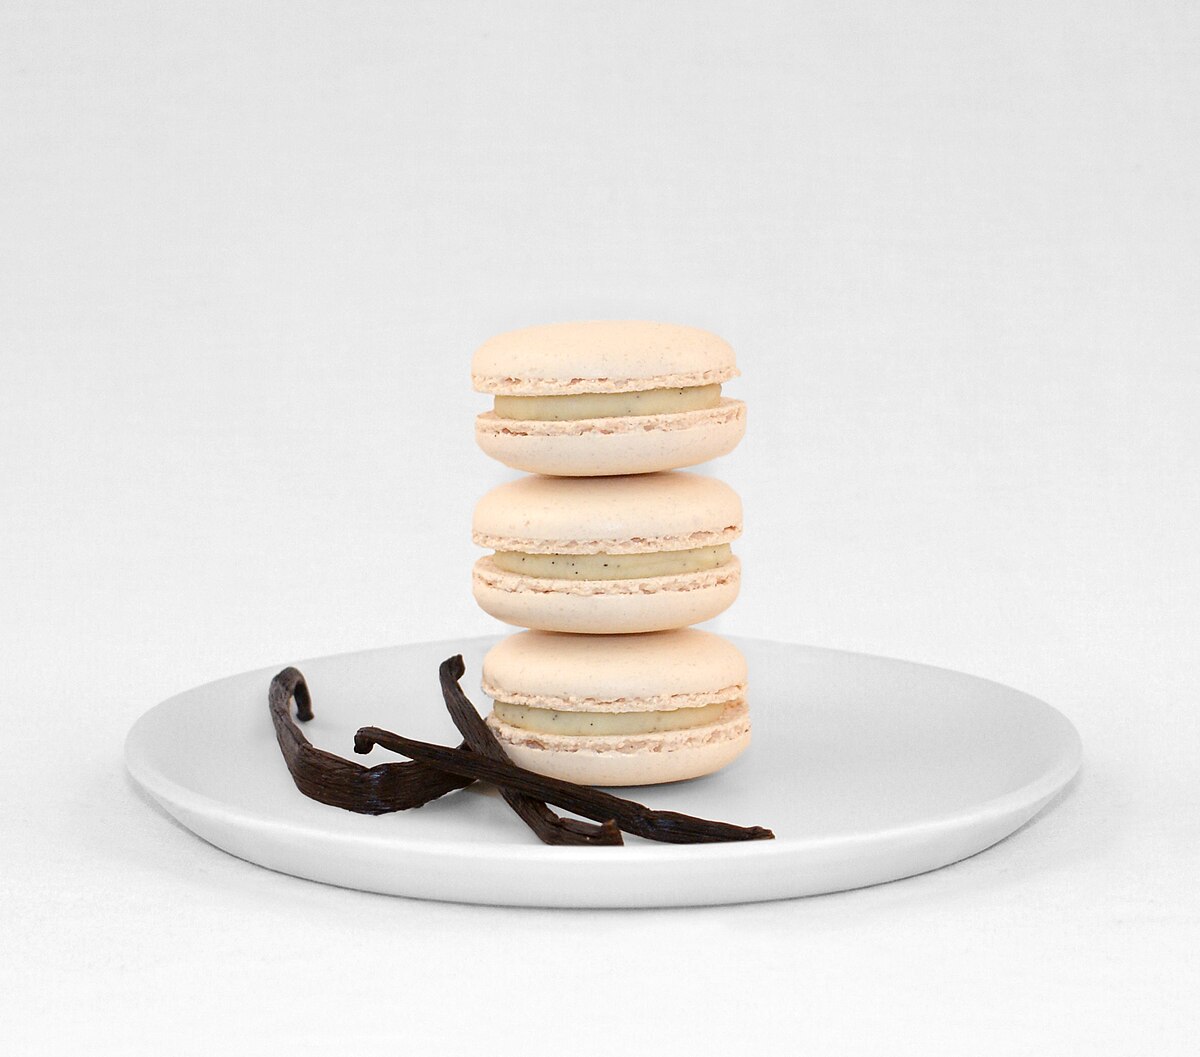 French Macarons - Life's Little Sweets